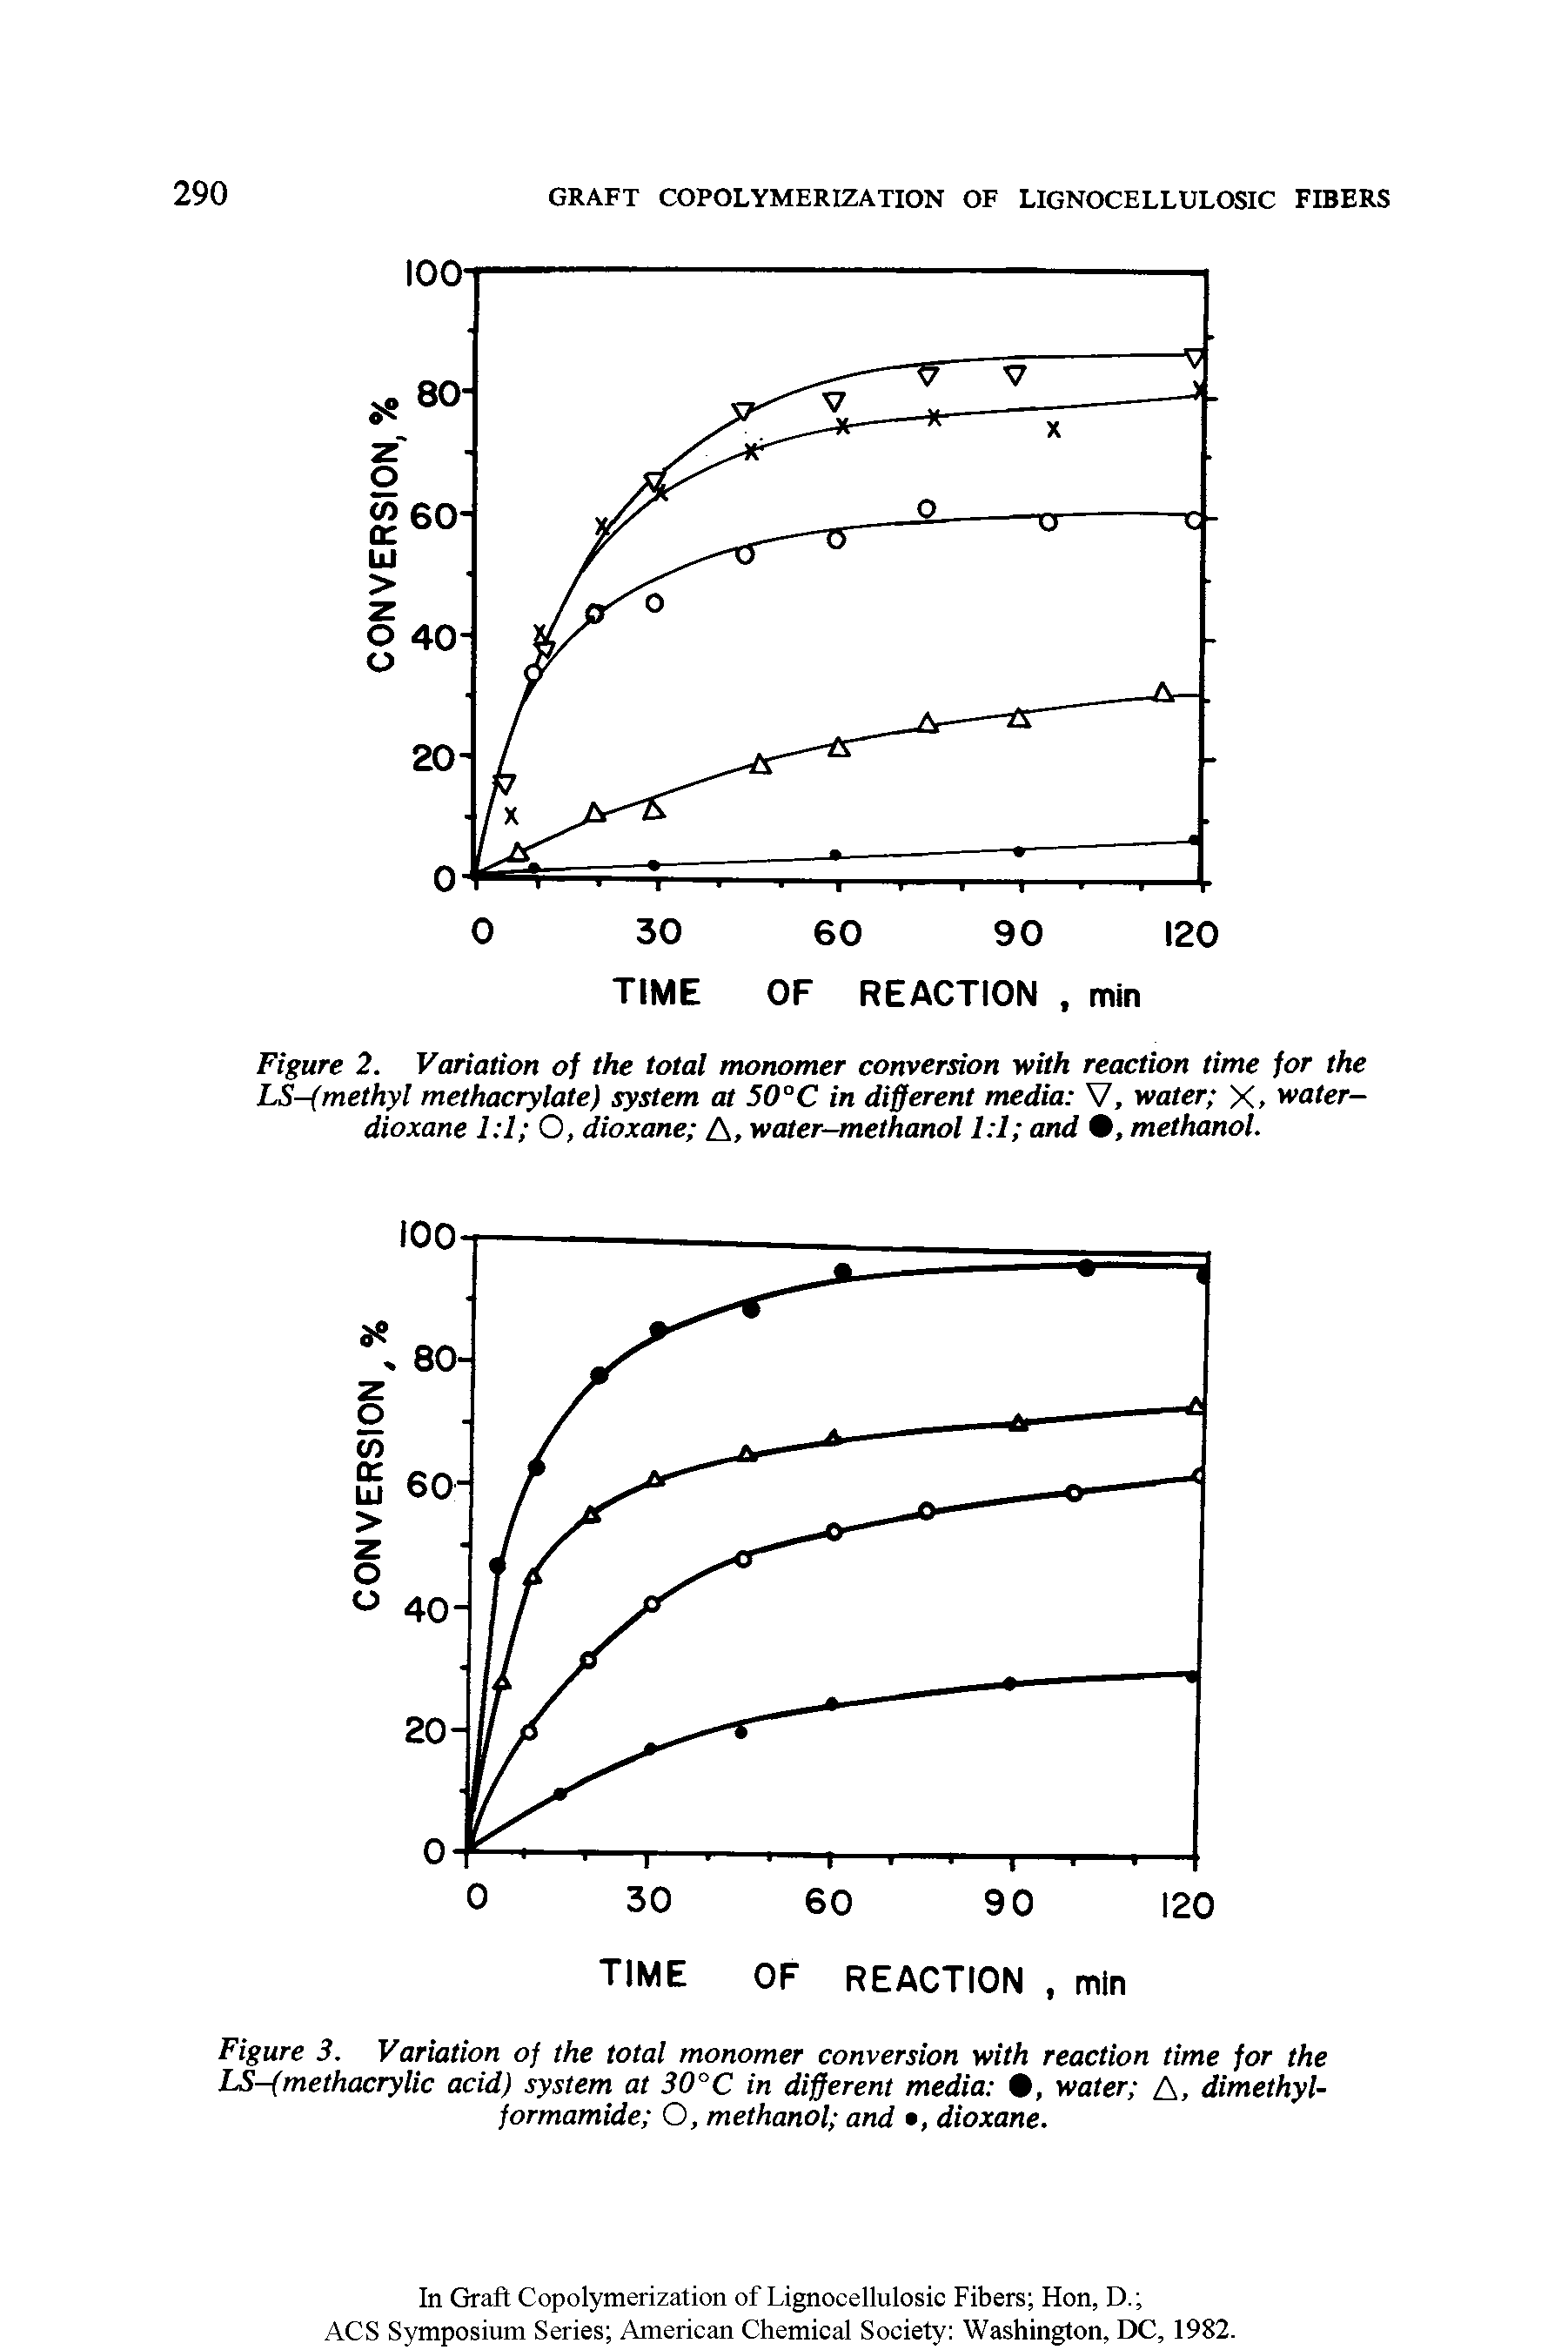 Figure 2. Variation of the total monomer conversion with reaction time for the LS-(methyl methacrylate) system at 50°C in different media V, water X, water-dioxane 1 1 O, dioxane A, water—methanol 1 1 and , methanol.